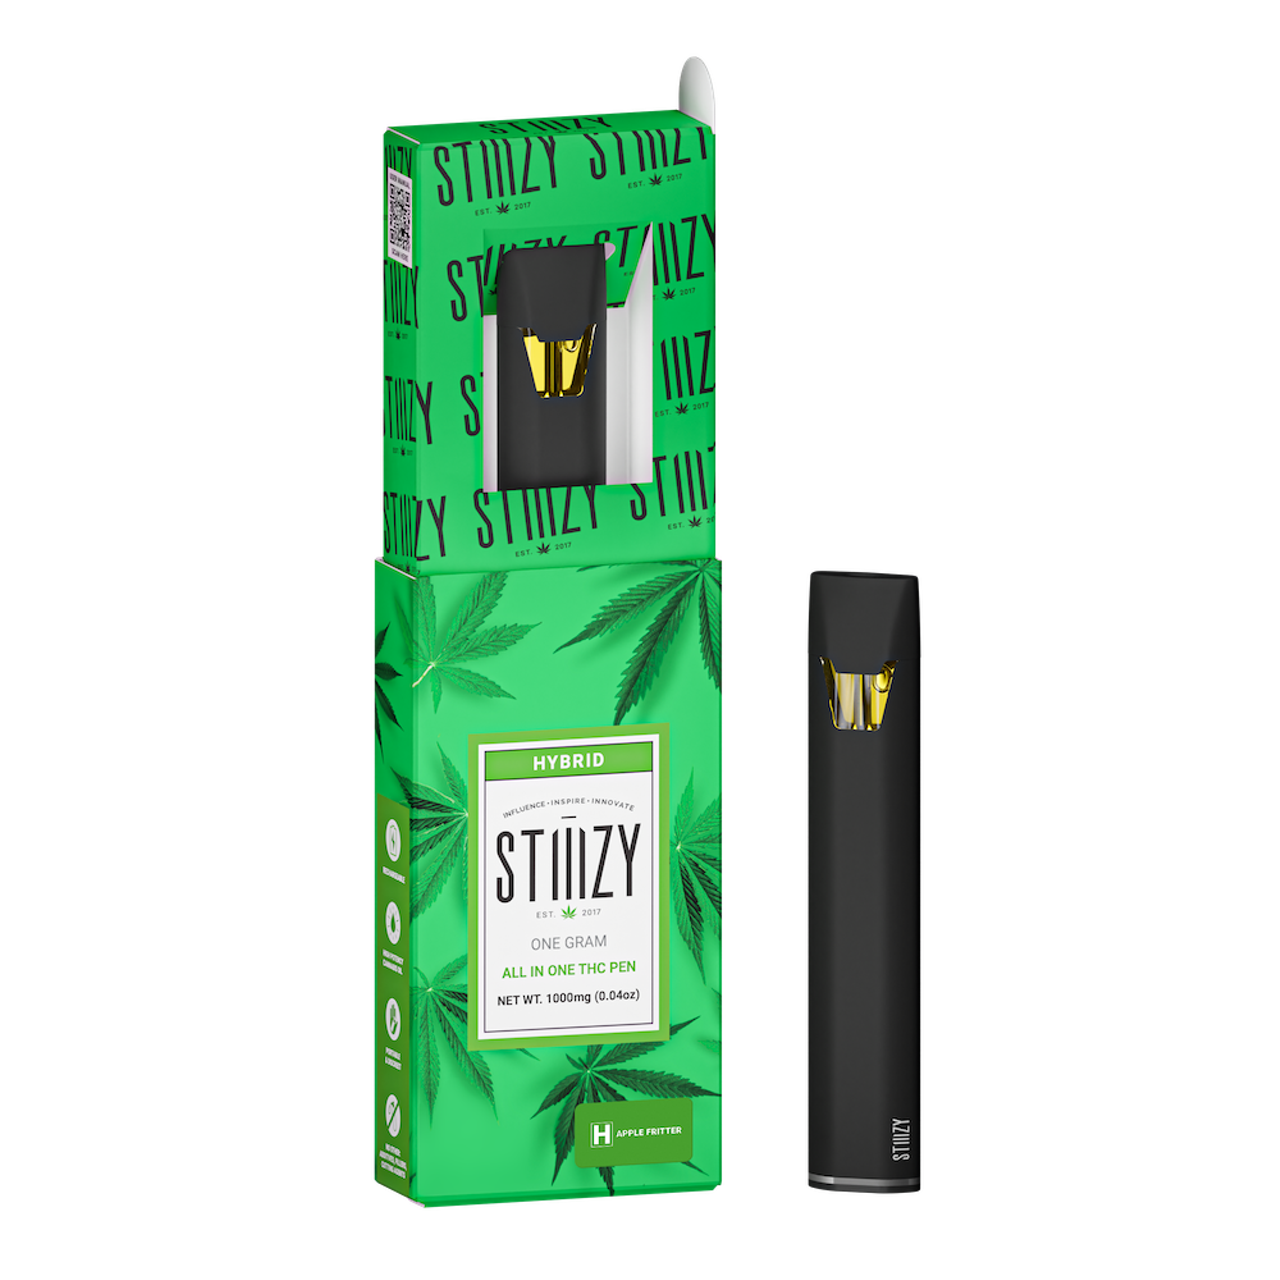 All In One THC Pen (Stiiizy)
stiiizy.com 
California-based Stiiizy recently dropped this new vape pen designed with portability in mind. The discreet, compact pens come with one gram of THC oil in indica, sativa, and hybrid varieties, and are also rechargeable and disposable.